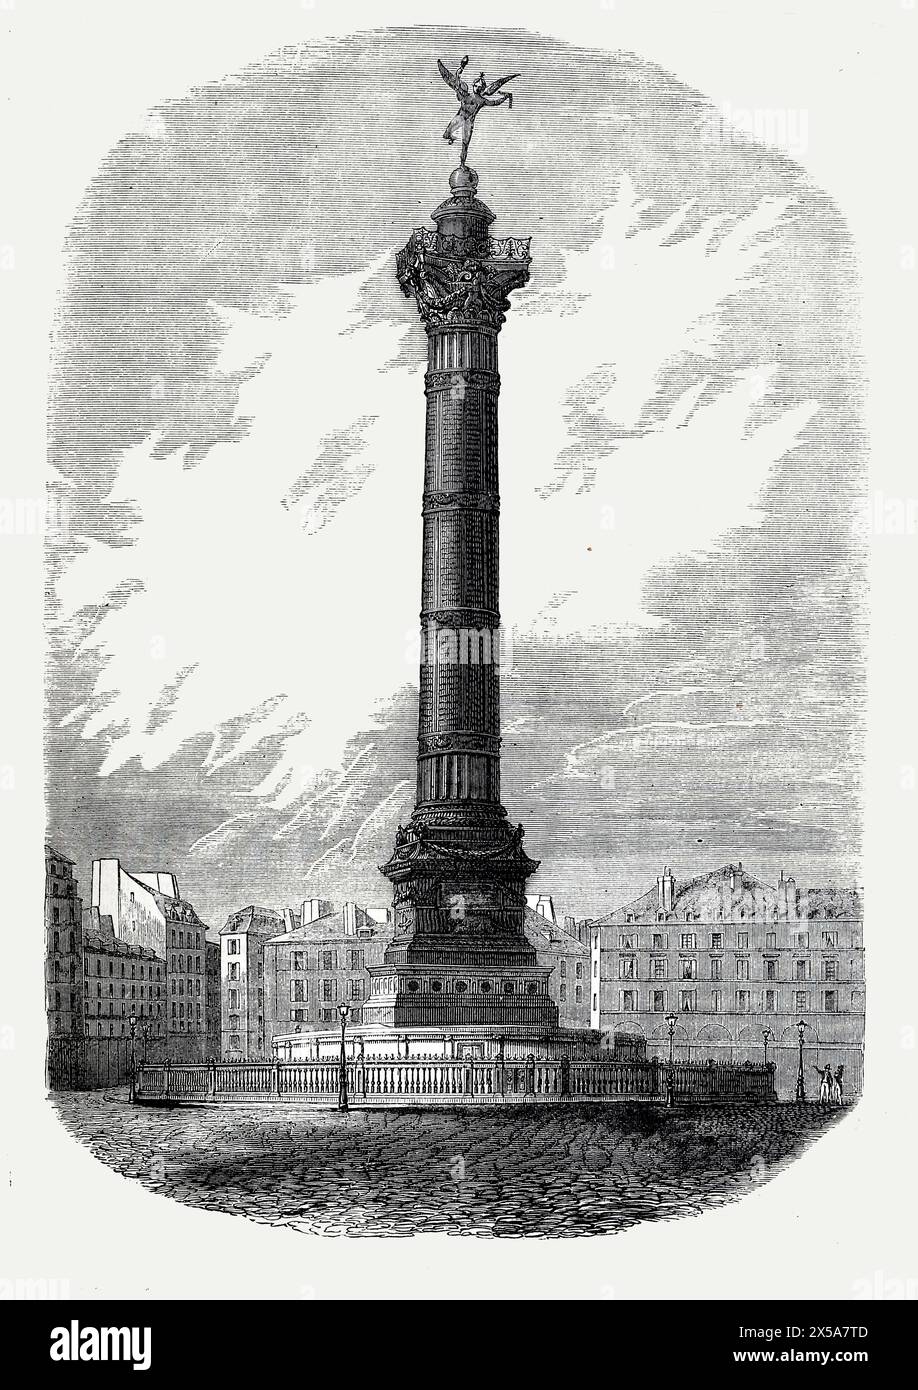 The Column of July (French; Colonne de Juillet) in the Place de la Bastille, Paris, France, as it appeared in the 19th century. The monument commemorates the Revolution of 1830. Illustration from Cassell's History of England, Vol VII. New Edition published Circ 1873-5. Stock Photo